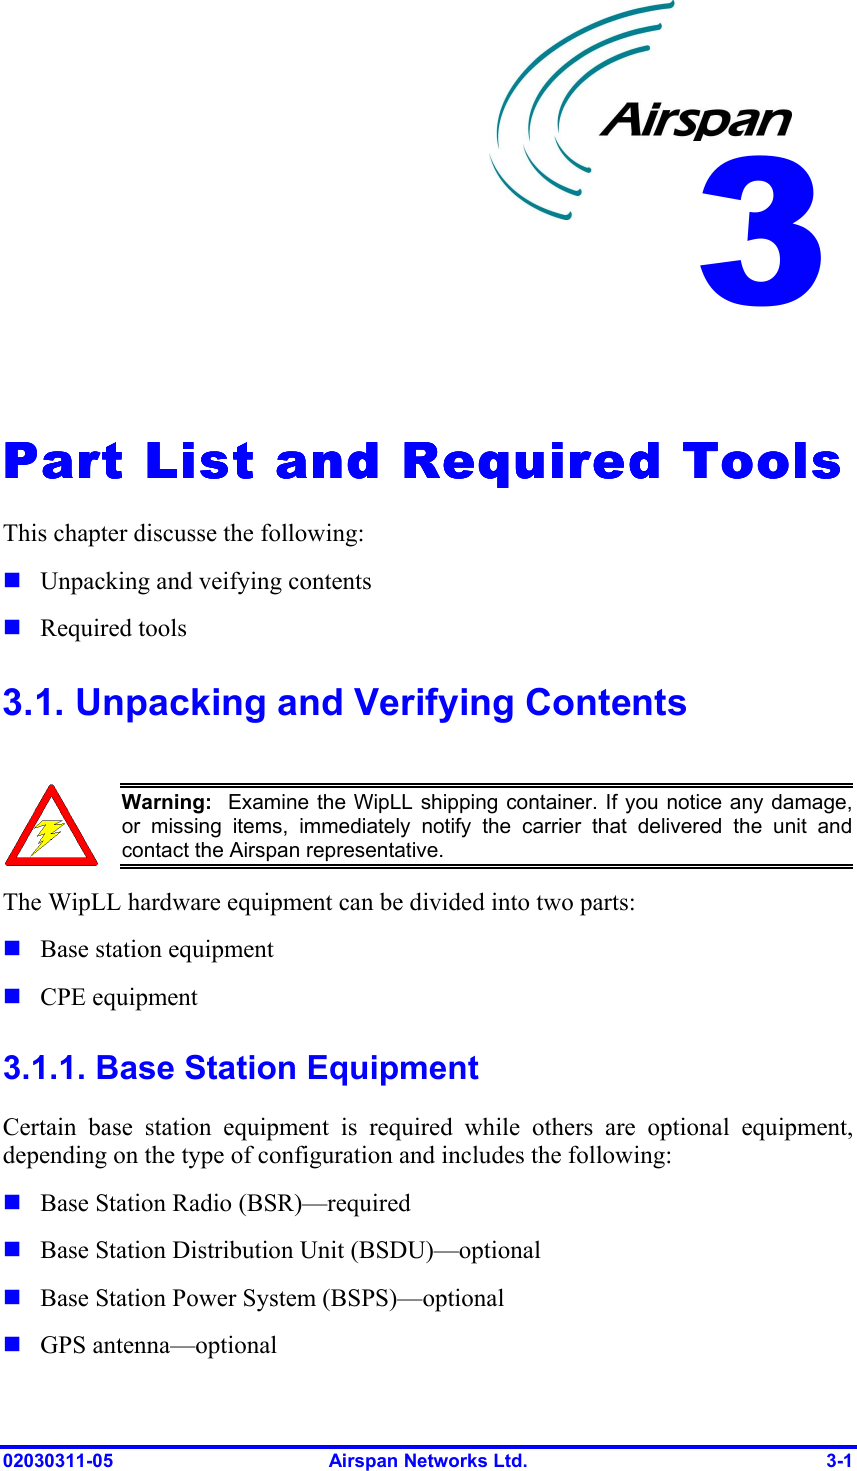  02030311-05  Airspan Networks Ltd.  3-1   Part List and Required ToolsPart List and Required ToolsPart List and Required ToolsPart List and Required Tools    This chapter discusse the following: ! Unpacking and veifying contents ! Required tools 3.1. Unpacking and Verifying Contents   Warning:  Examine the WipLL shipping container. If you notice any damage,or missing items, immediately notify the carrier that delivered the unit andcontact the Airspan representative. The WipLL hardware equipment can be divided into two parts: ! Base station equipment ! CPE equipment 3.1.1. Base Station Equipment Certain base station equipment is required while others are optional equipment, depending on the type of configuration and includes the following: ! Base Station Radio (BSR)—required ! Base Station Distribution Unit (BSDU)—optional  ! Base Station Power System (BSPS)—optional ! GPS antenna—optional  3 